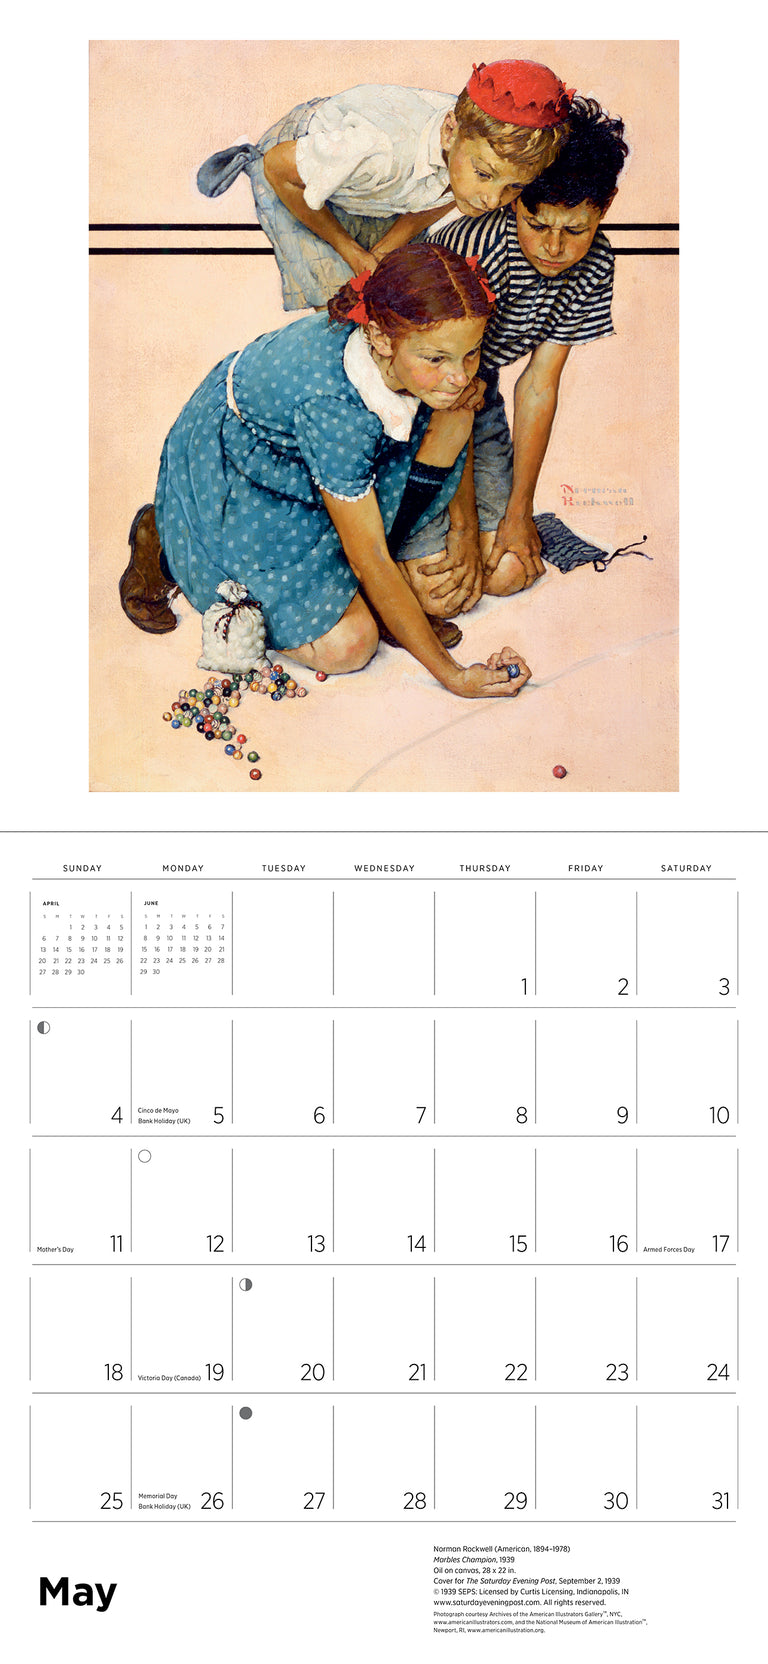 2025 Norman Rockwell: The Saturday Evening Post - Square Wall Calendar